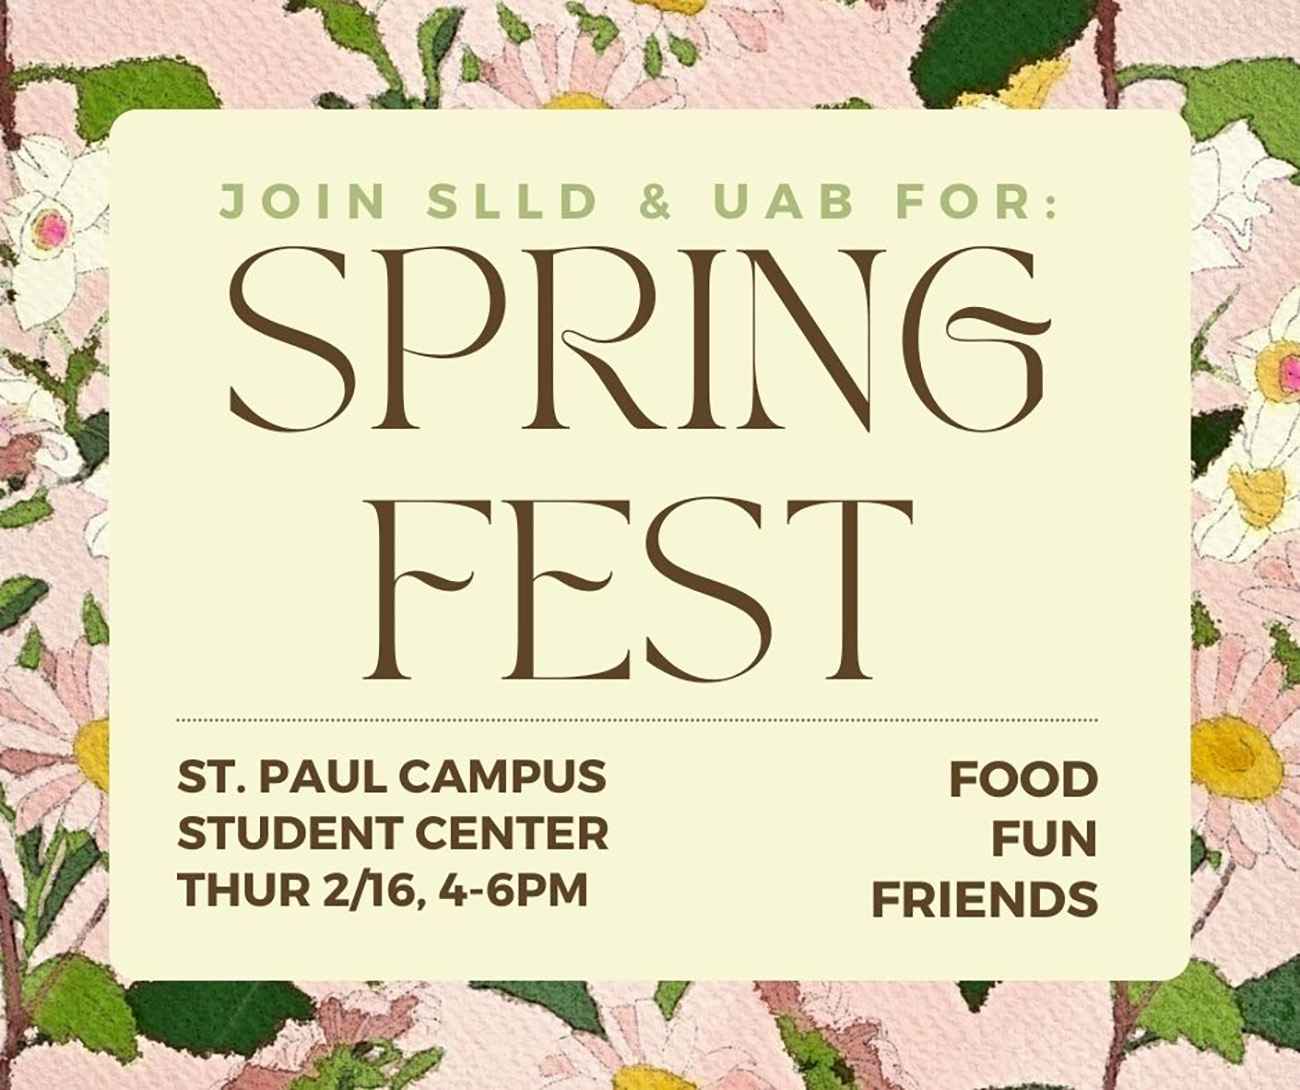 Join SLLD and UAB for Spring Fest, Saint Paul Campus, Student Center, Thursday February 16, 4–6 p.m. food, fun, friends, surrounded by a painterly floral border